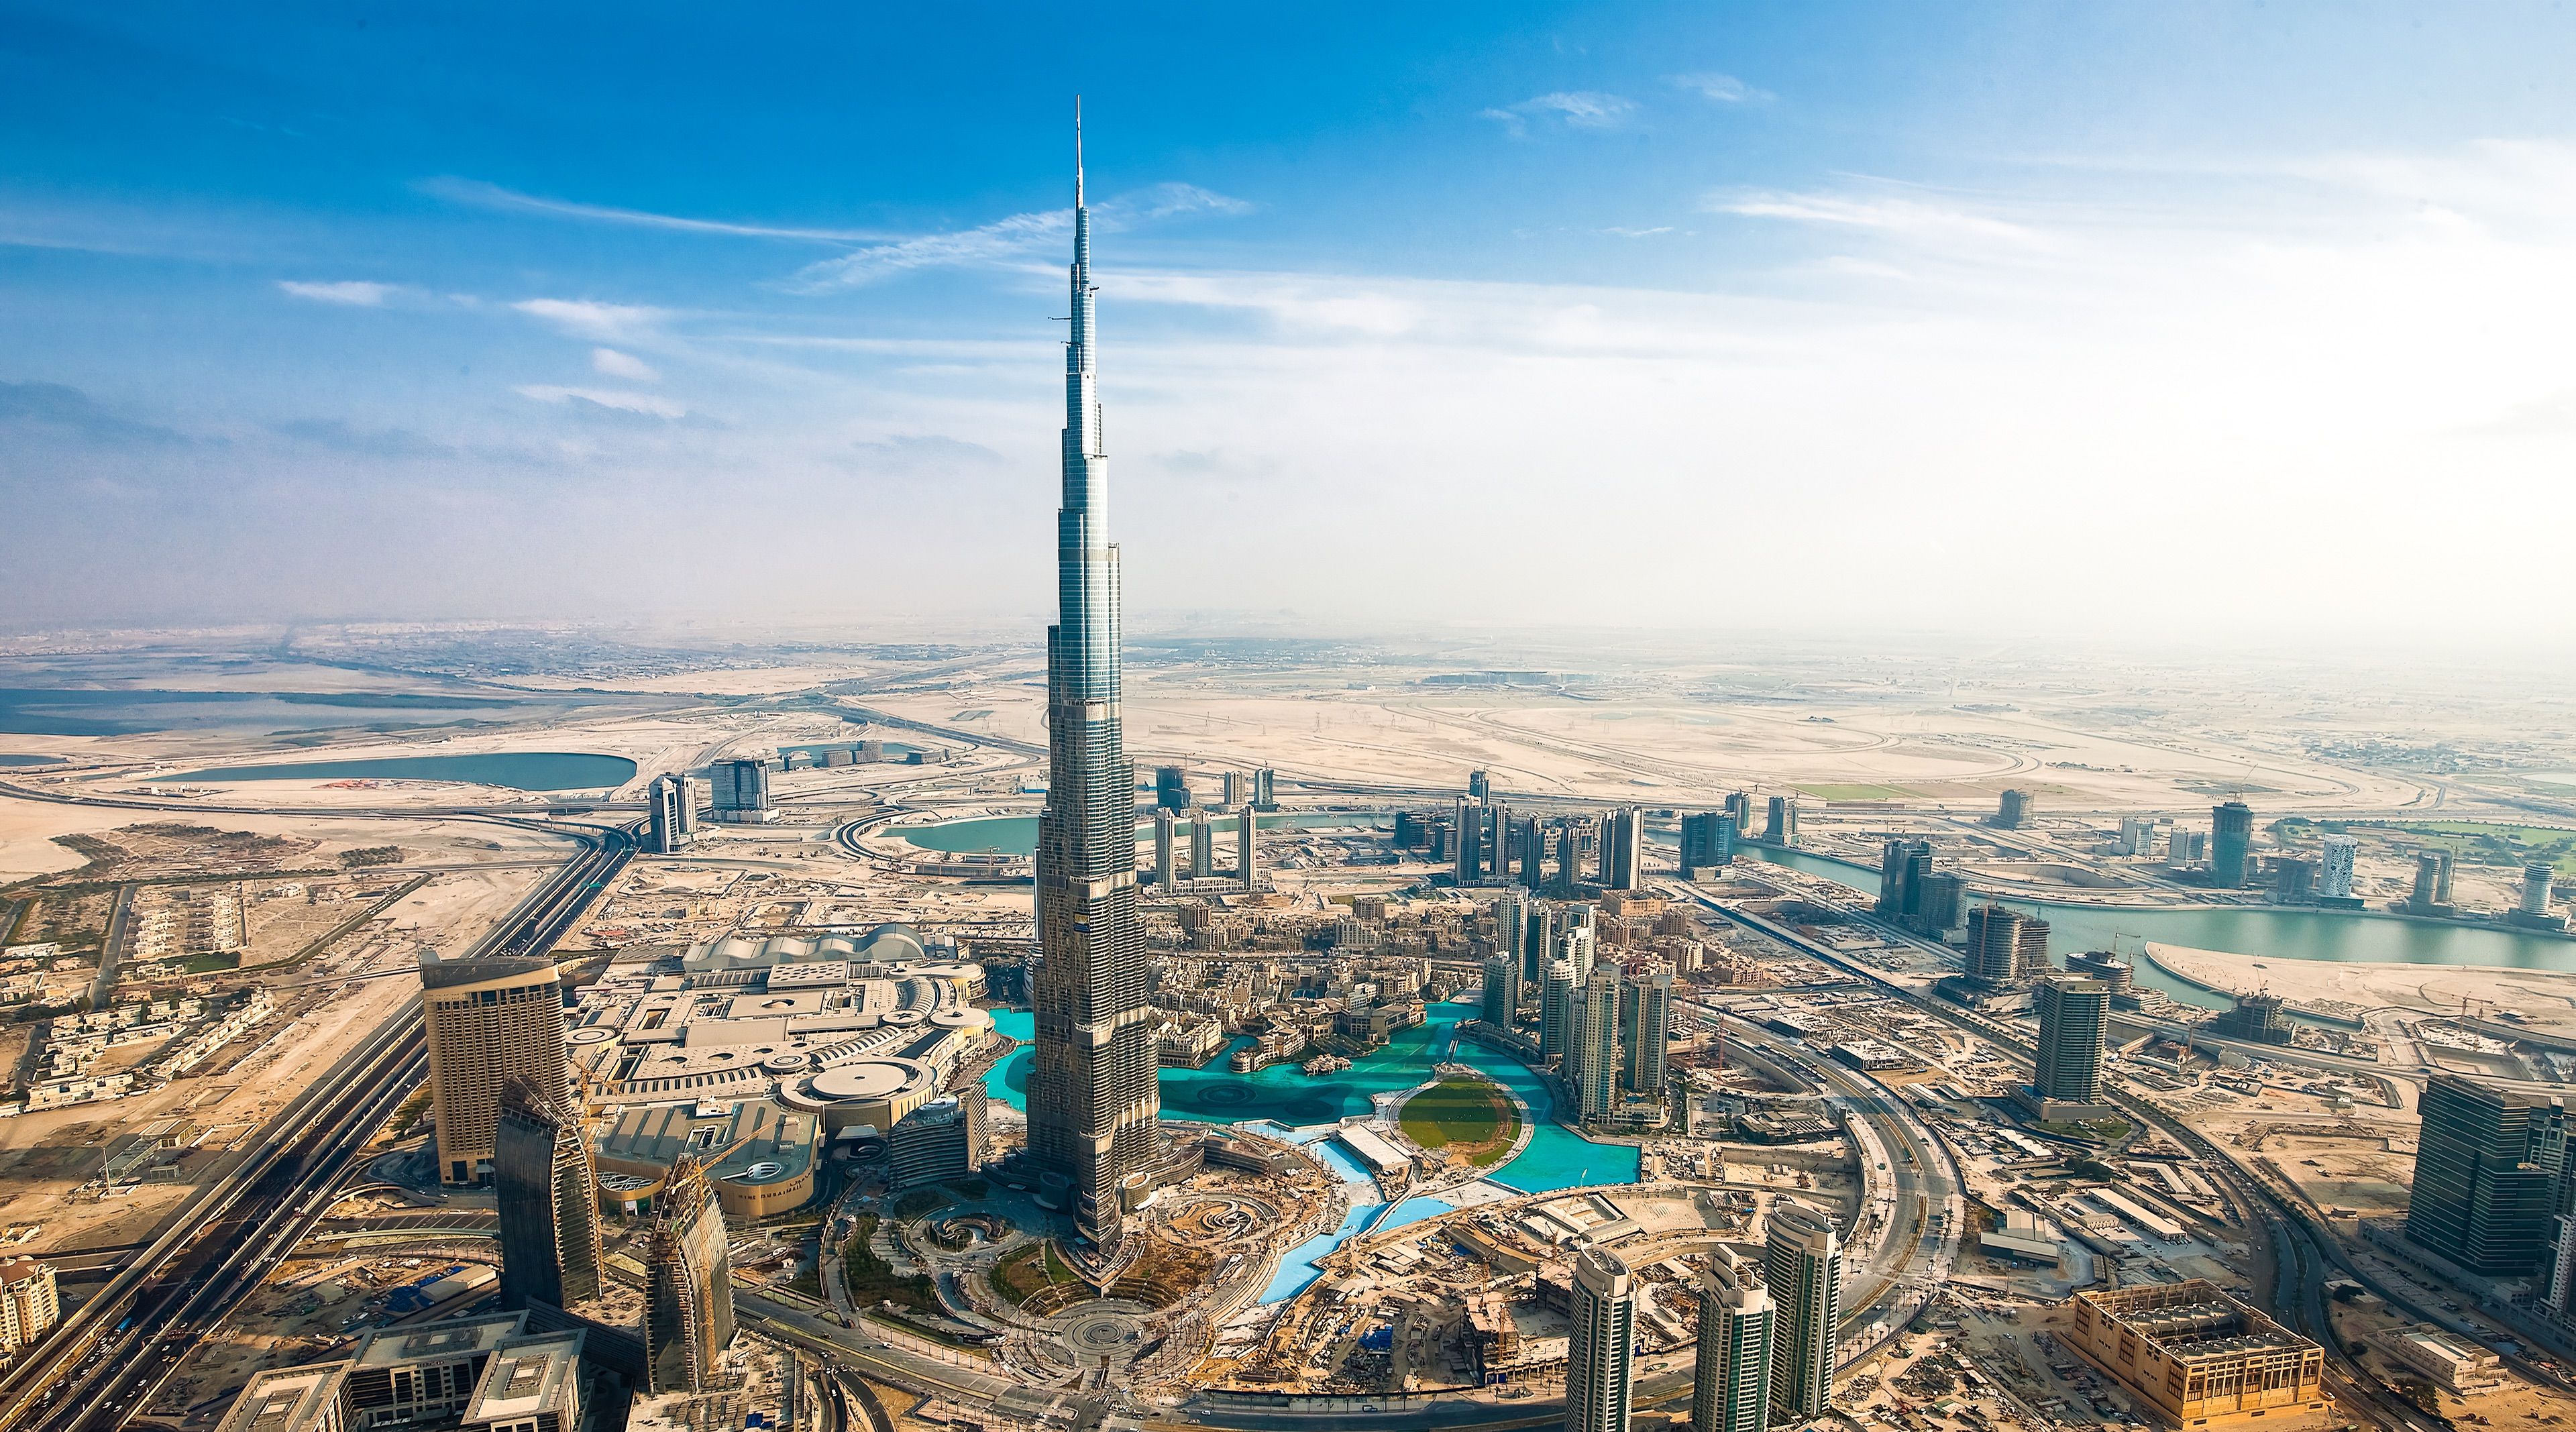 Dubai sets example of being city to have successfully resumed tourism